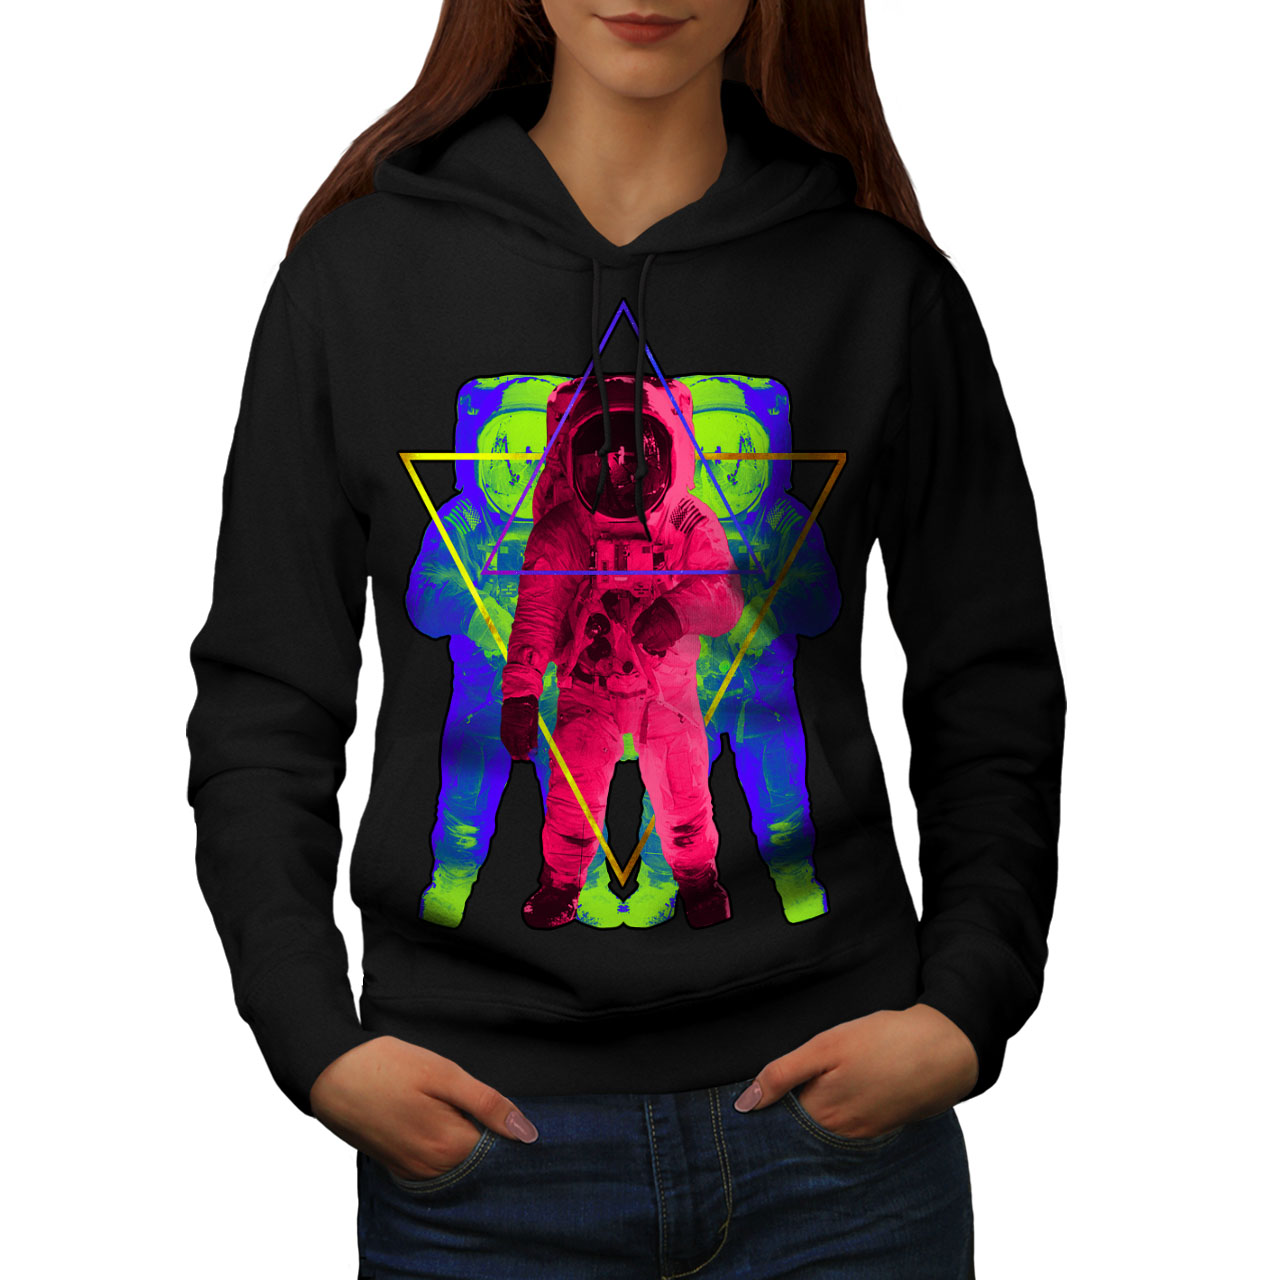 Wellcoda Psychedelic Astronaut Womens Hoodie, Star Casual Hooded ...